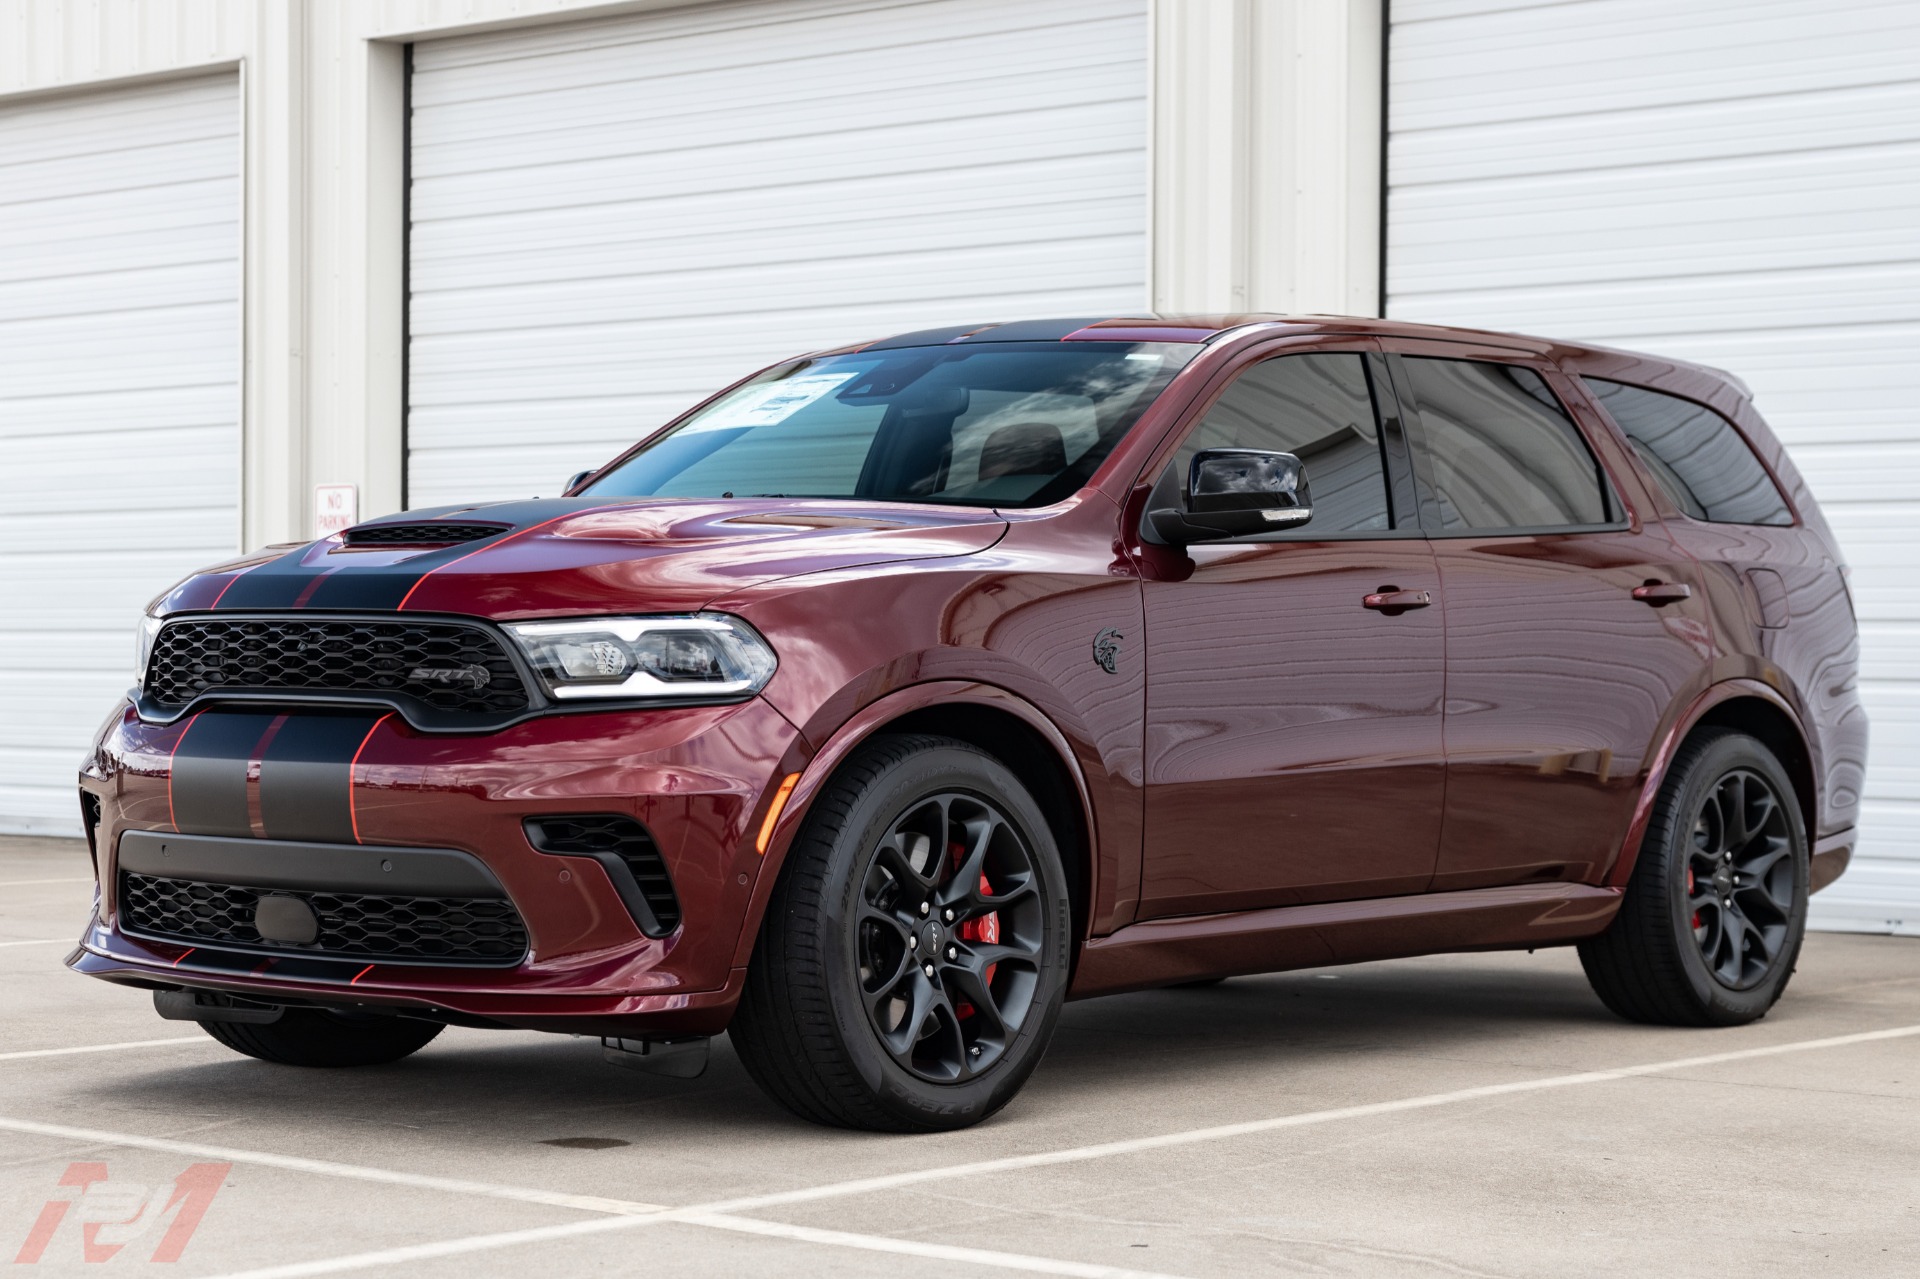 Used 2021 Dodge Durango SRT Hellcat For Sale (Special Pricing) BJ